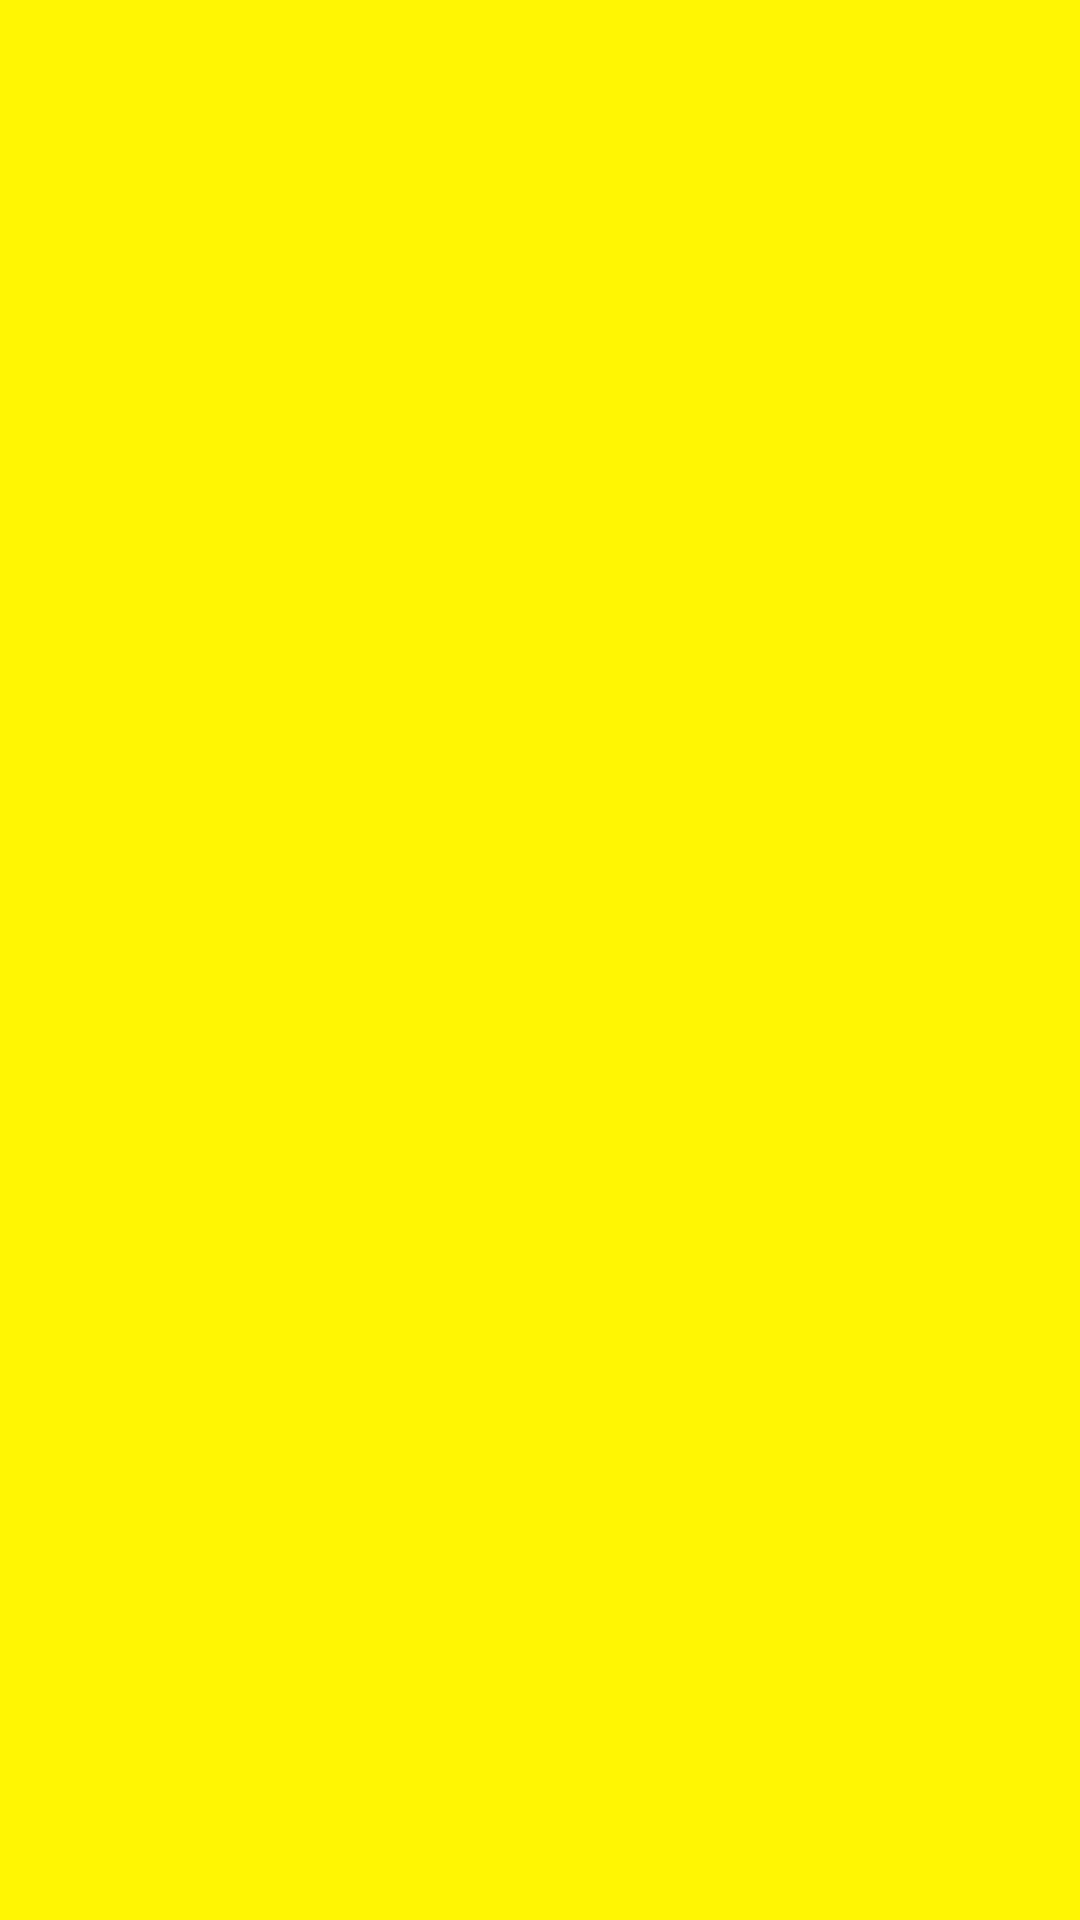 A Solid, Bright Shade of Yellow Wallpaper